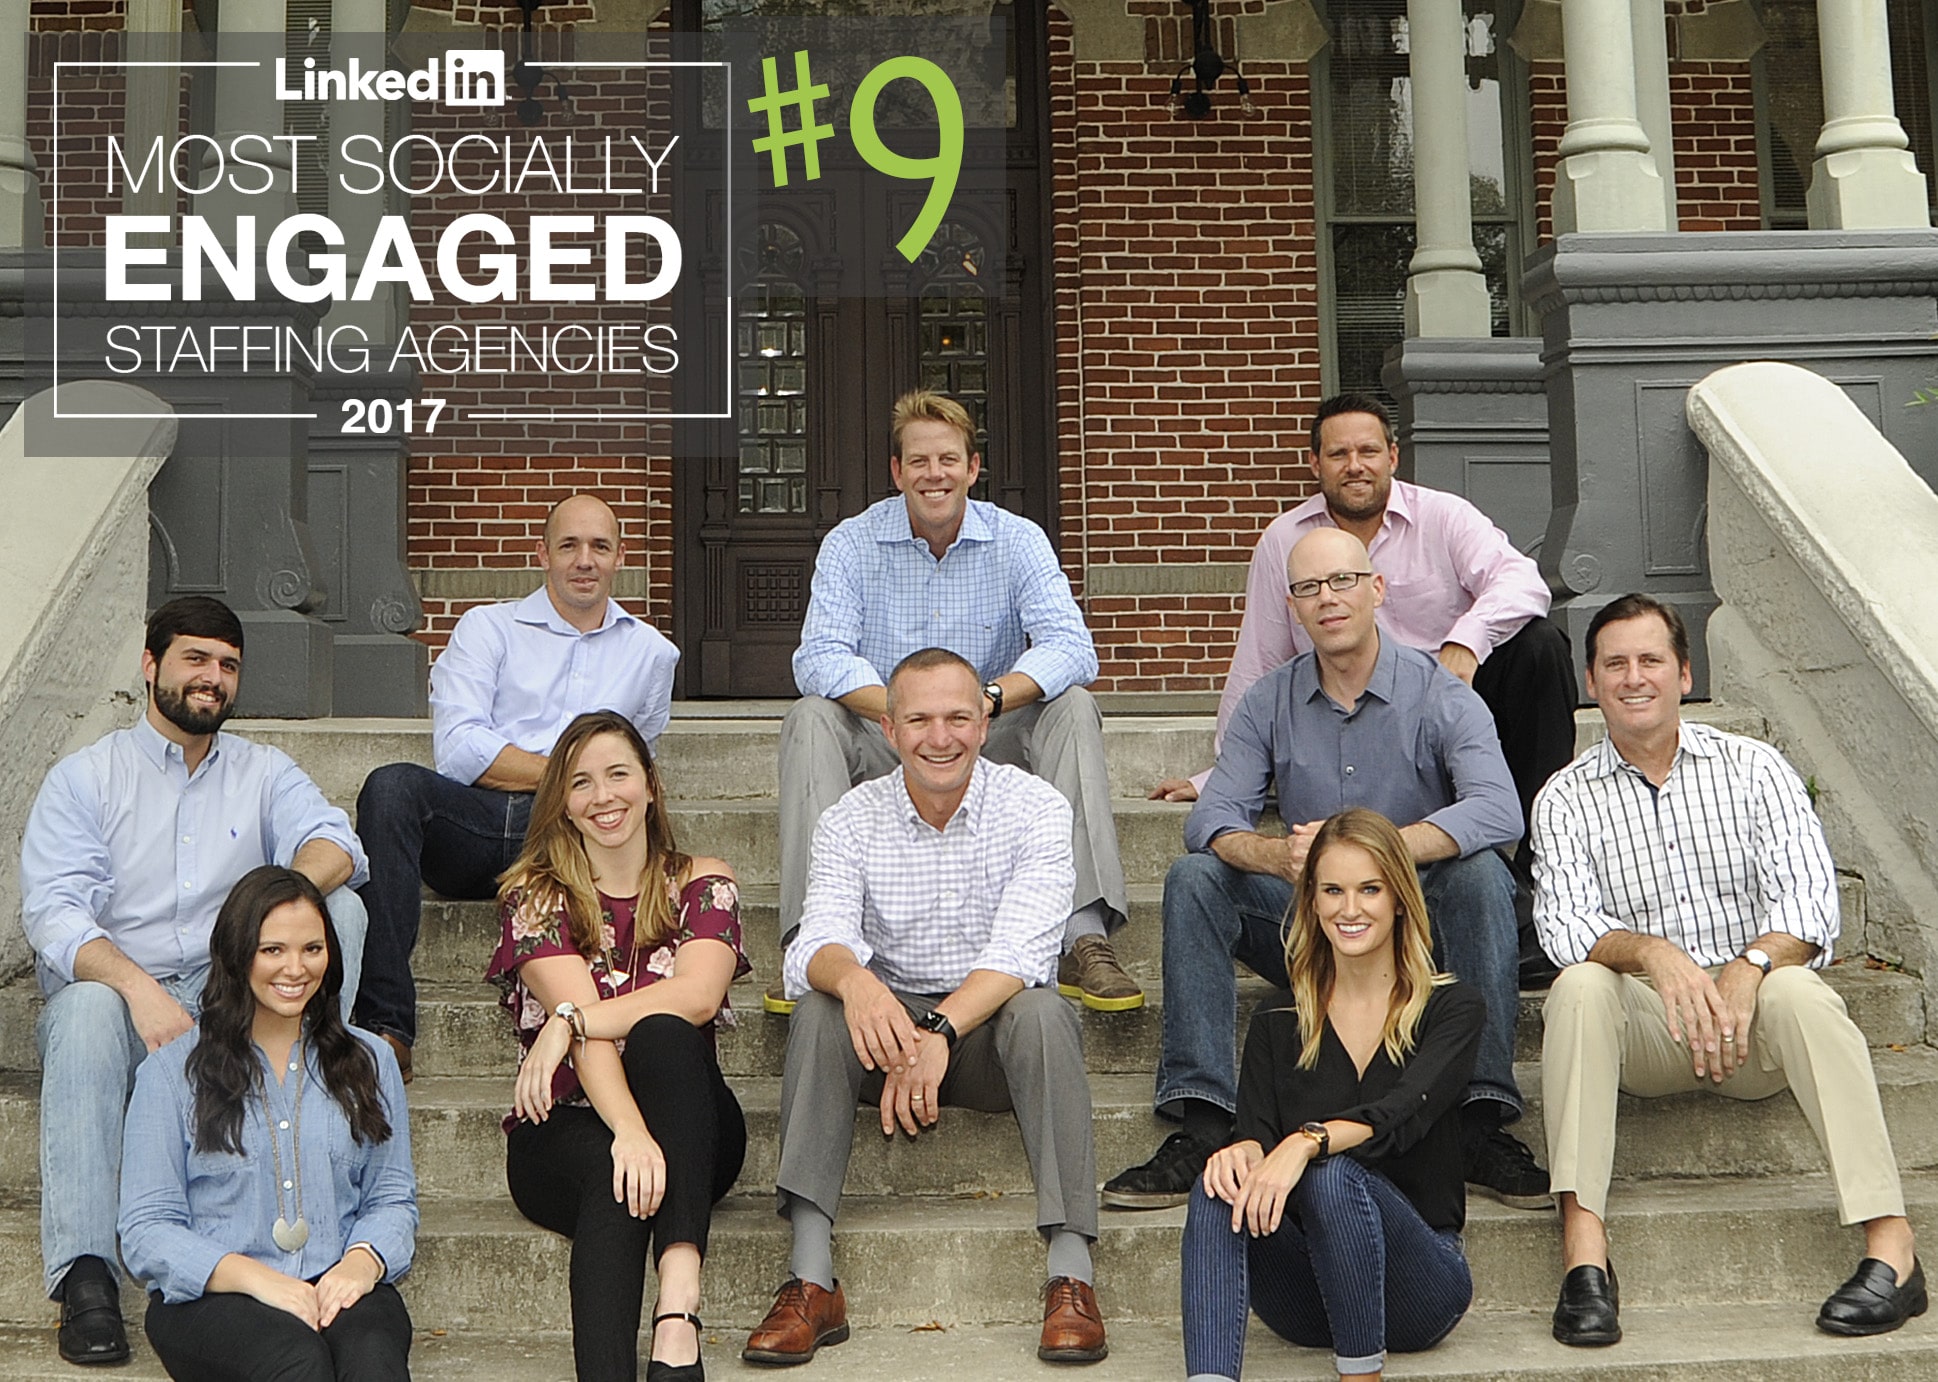 FloodGate Medical ranked #9 on LinkedIn's 2017 Top 25 Most Socially Engaged Staffing Agencies